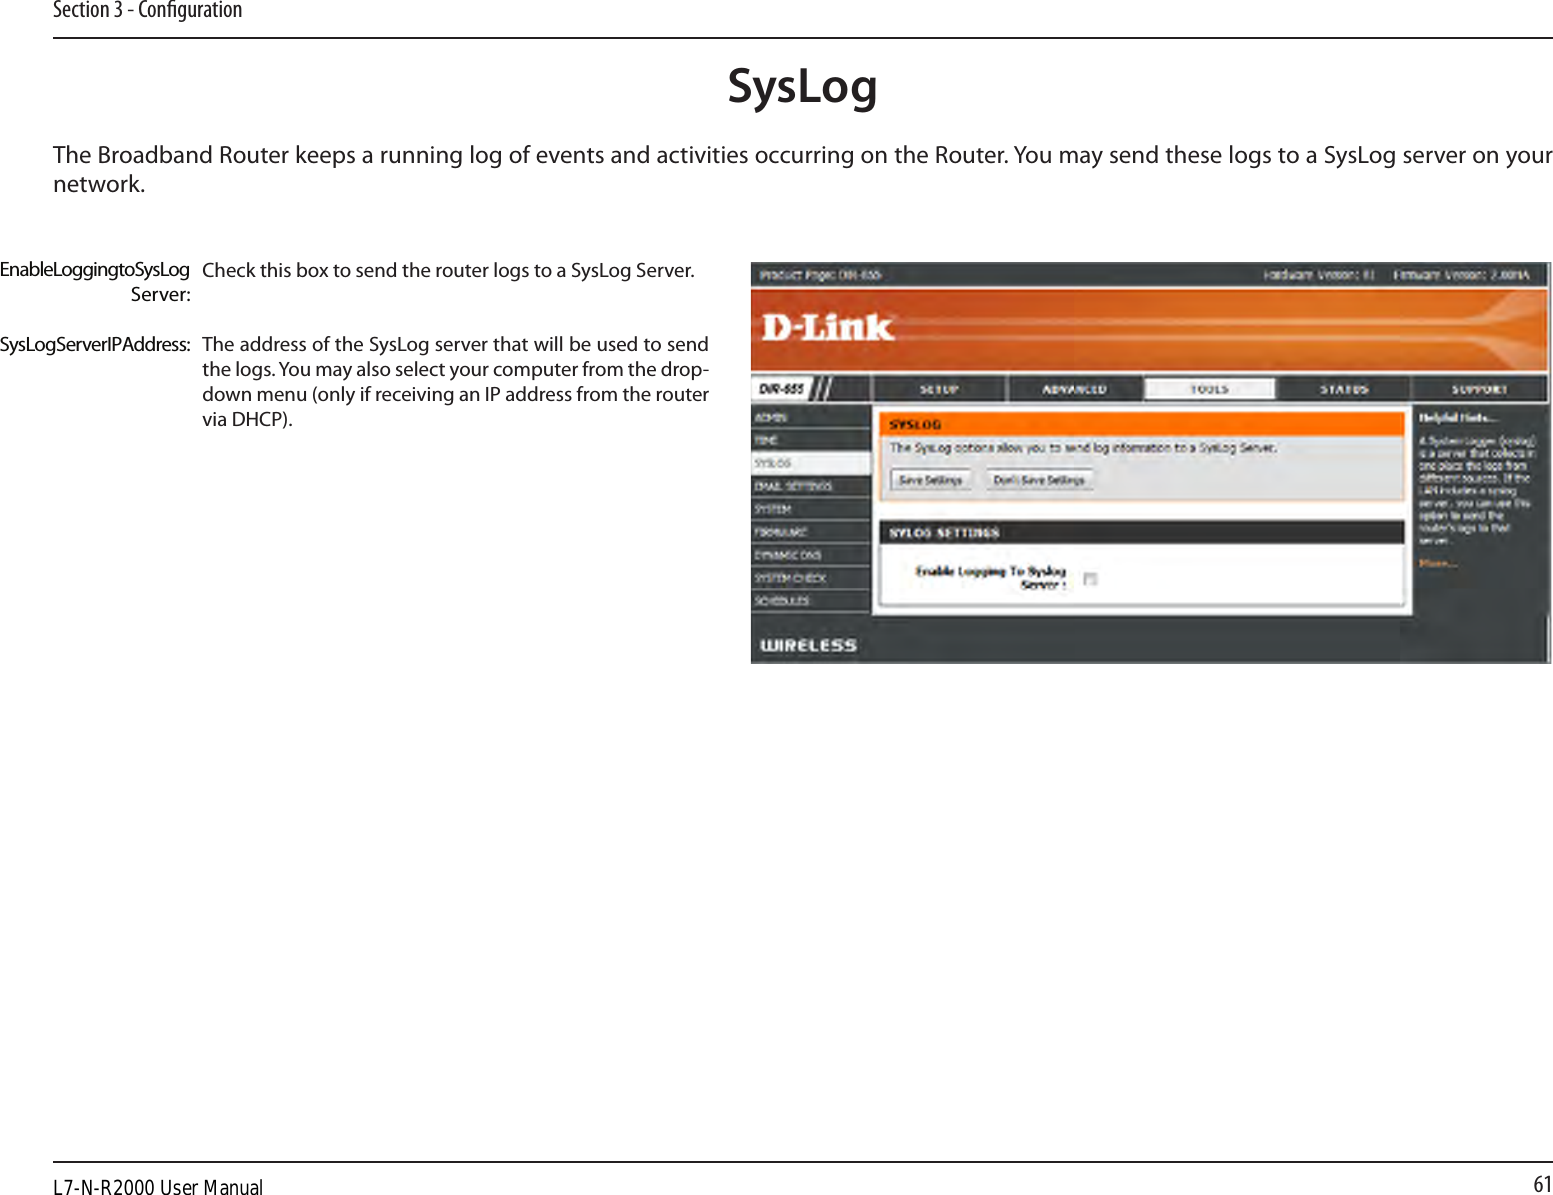 61Section 3 - CongurationSysLogThe Broadband Router keeps a running log of events and activities occurring on the Router. You may send these logs to a SysLog server on your network.Enable Logging to SysLog Server:SysLog Server IP Address:Check this box to send the router logs to a SysLog Server.The address of the SysLog server that will be used to send the logs. You may also select your computer from the drop-down menu (only if receiving an IP address from the router via DHCP).L7-N-R2000 User Manual